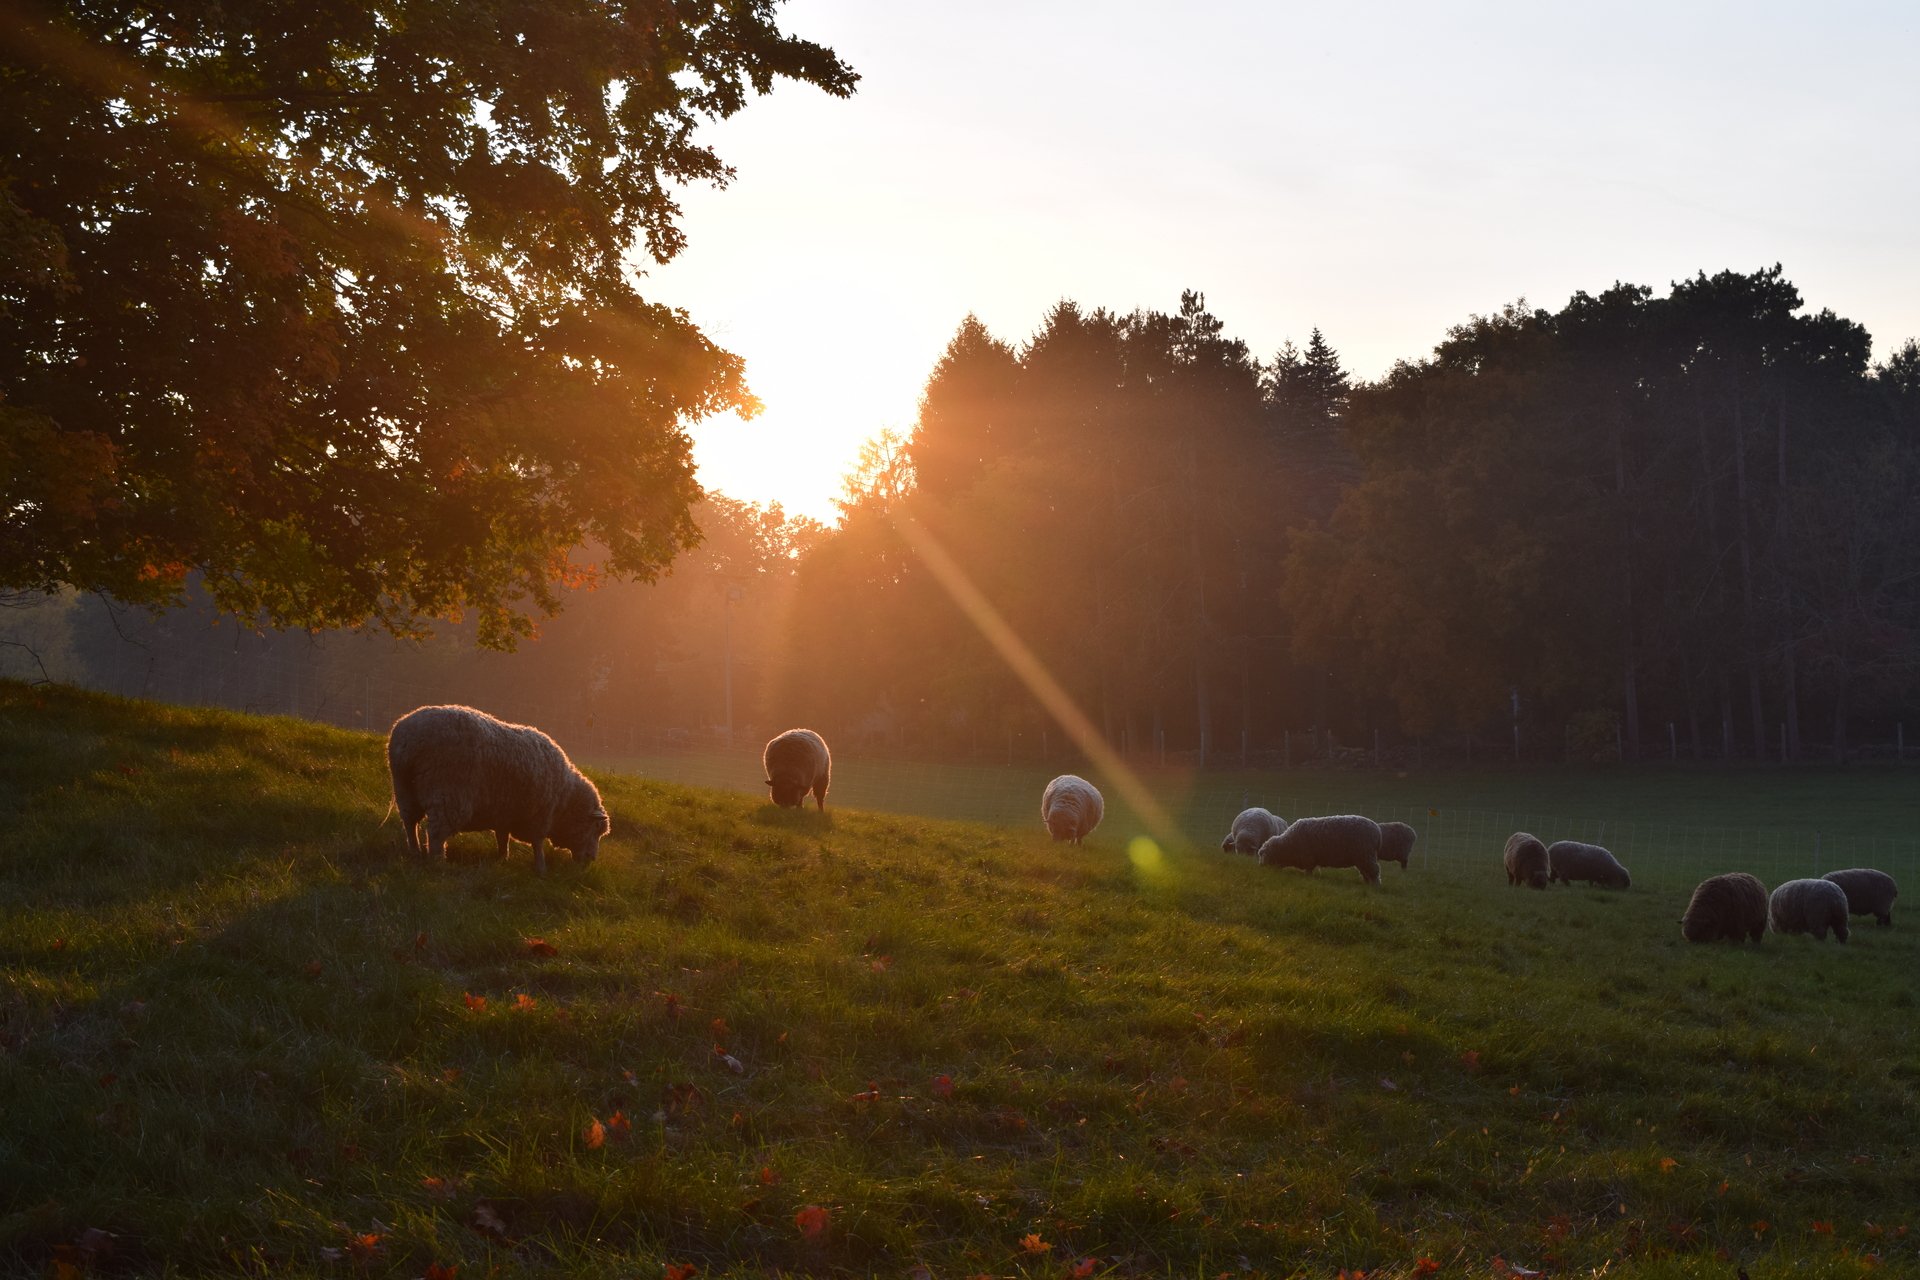 Sheep eating grass on a hillside as the sun is setting through the trees in a distance.